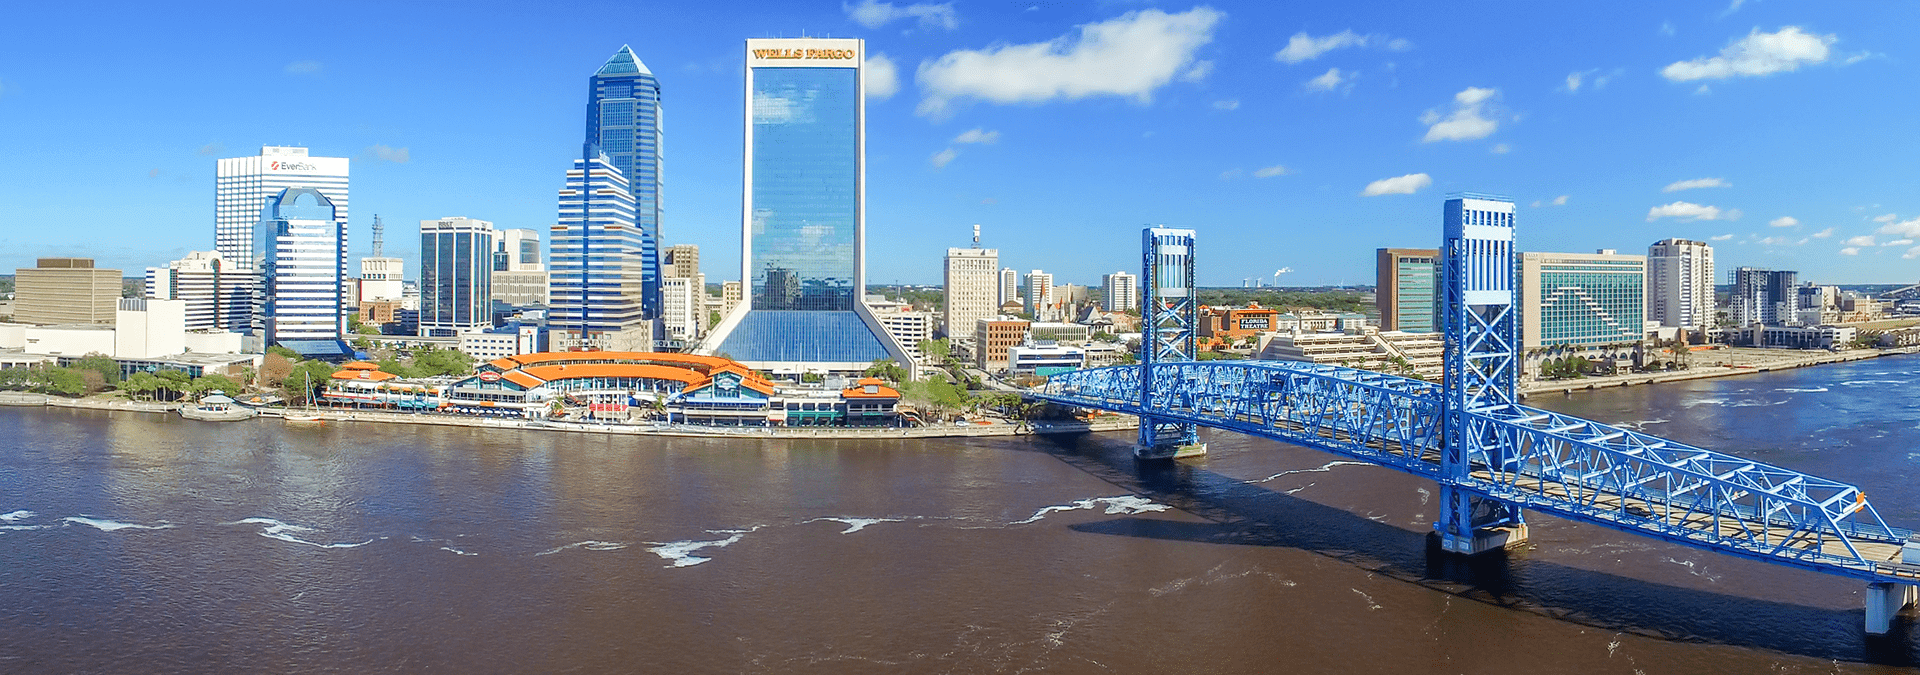 aerial view of jacksonville florida